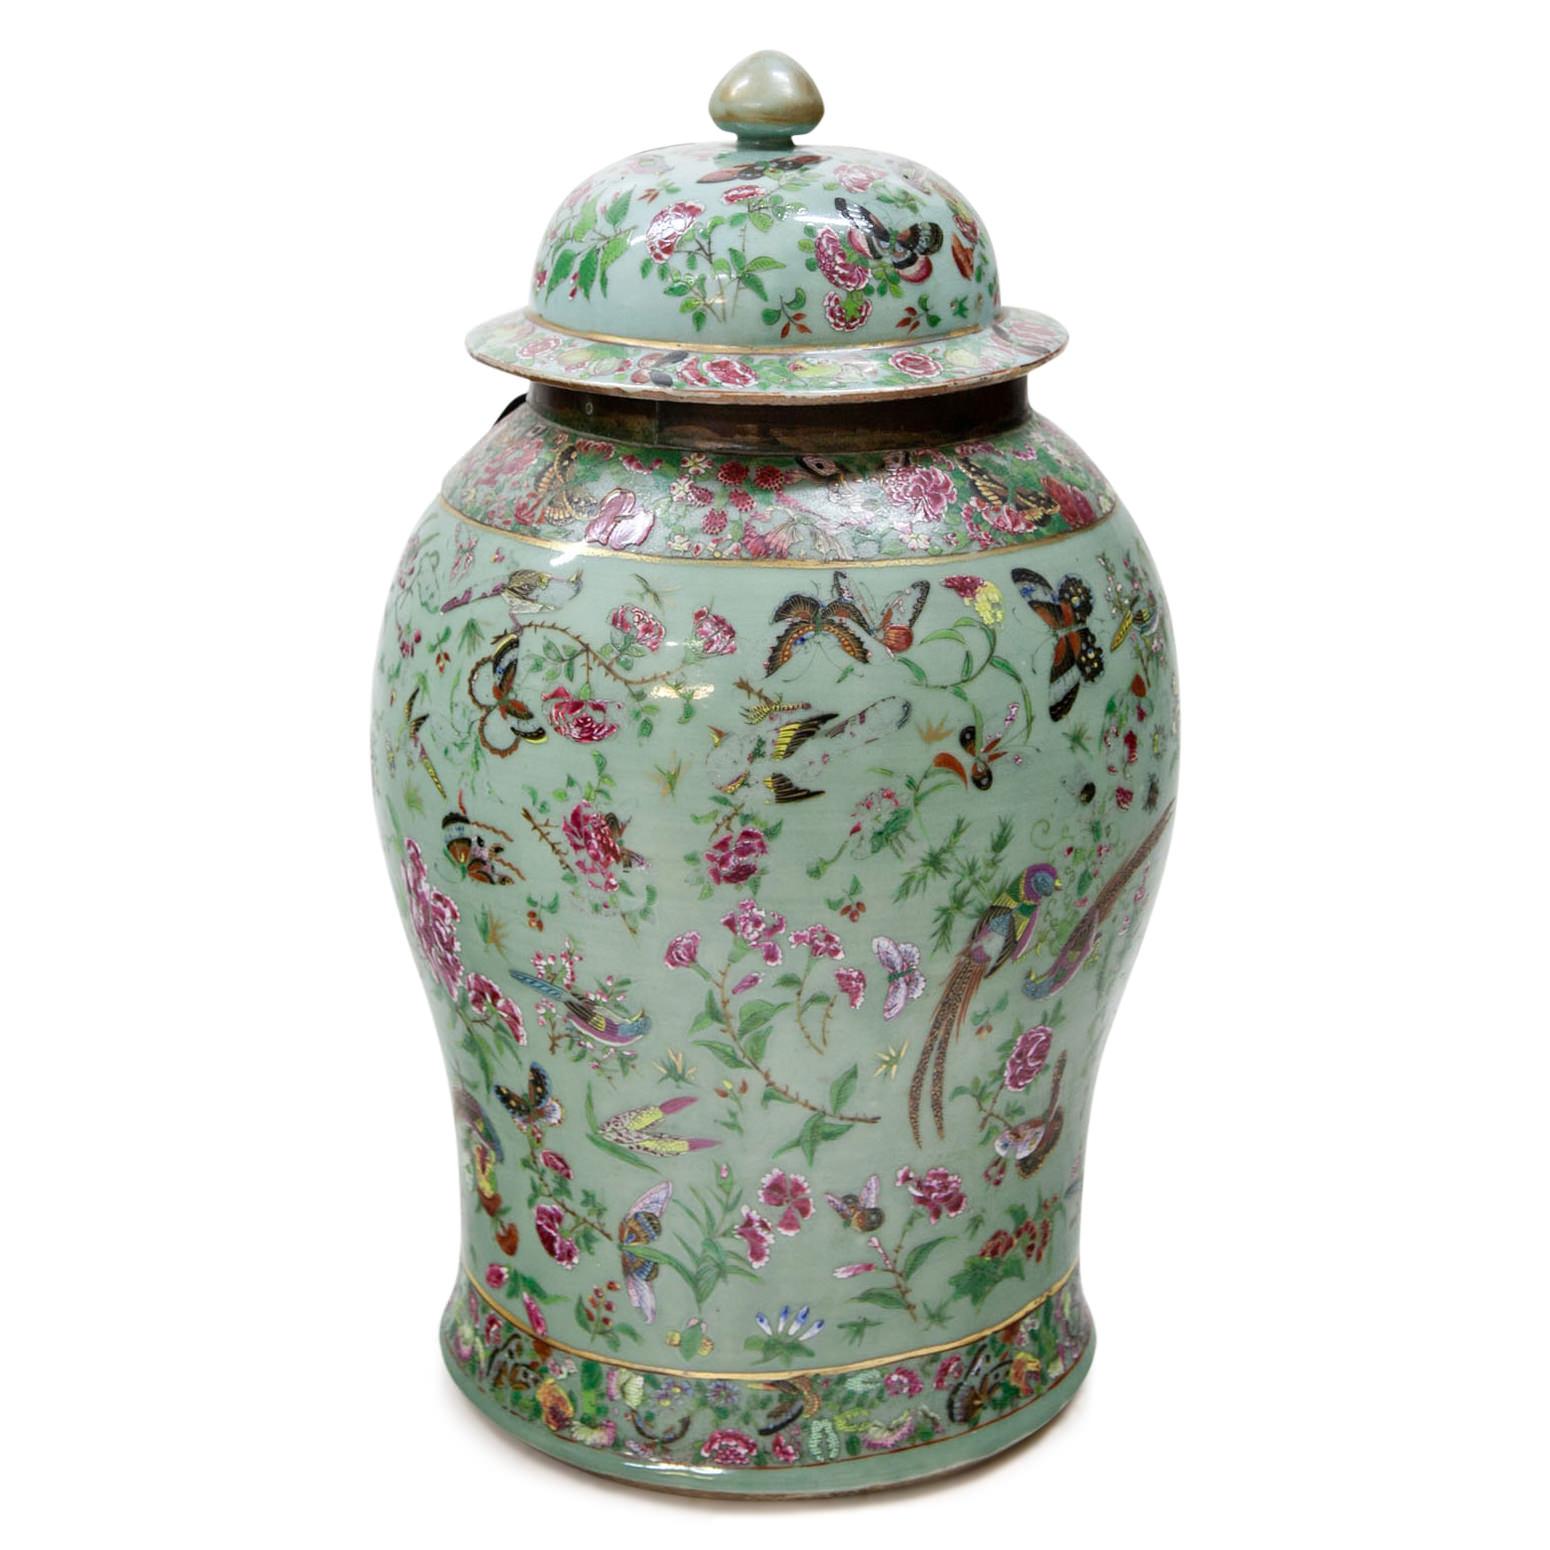 Pair of famille verte lidded urns with iron fittings and hinges as well as a polychrome paint in the shape of flowers, birds and butterflies.